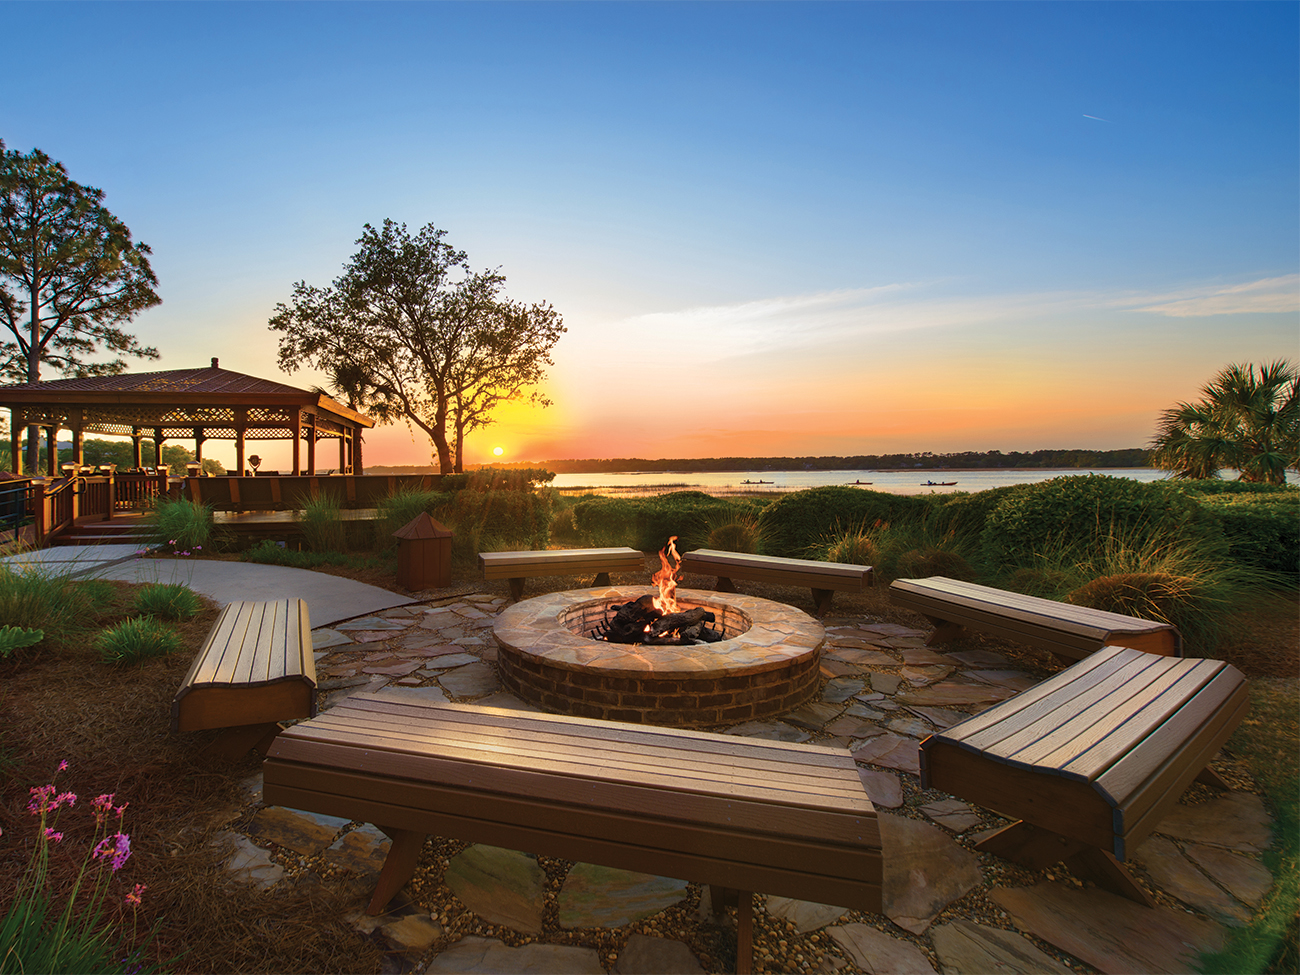 Marriott's Harbour Point Fire Pit. Marriott's Harbour Point is located in Hilton Head Island, South Carolina United States.